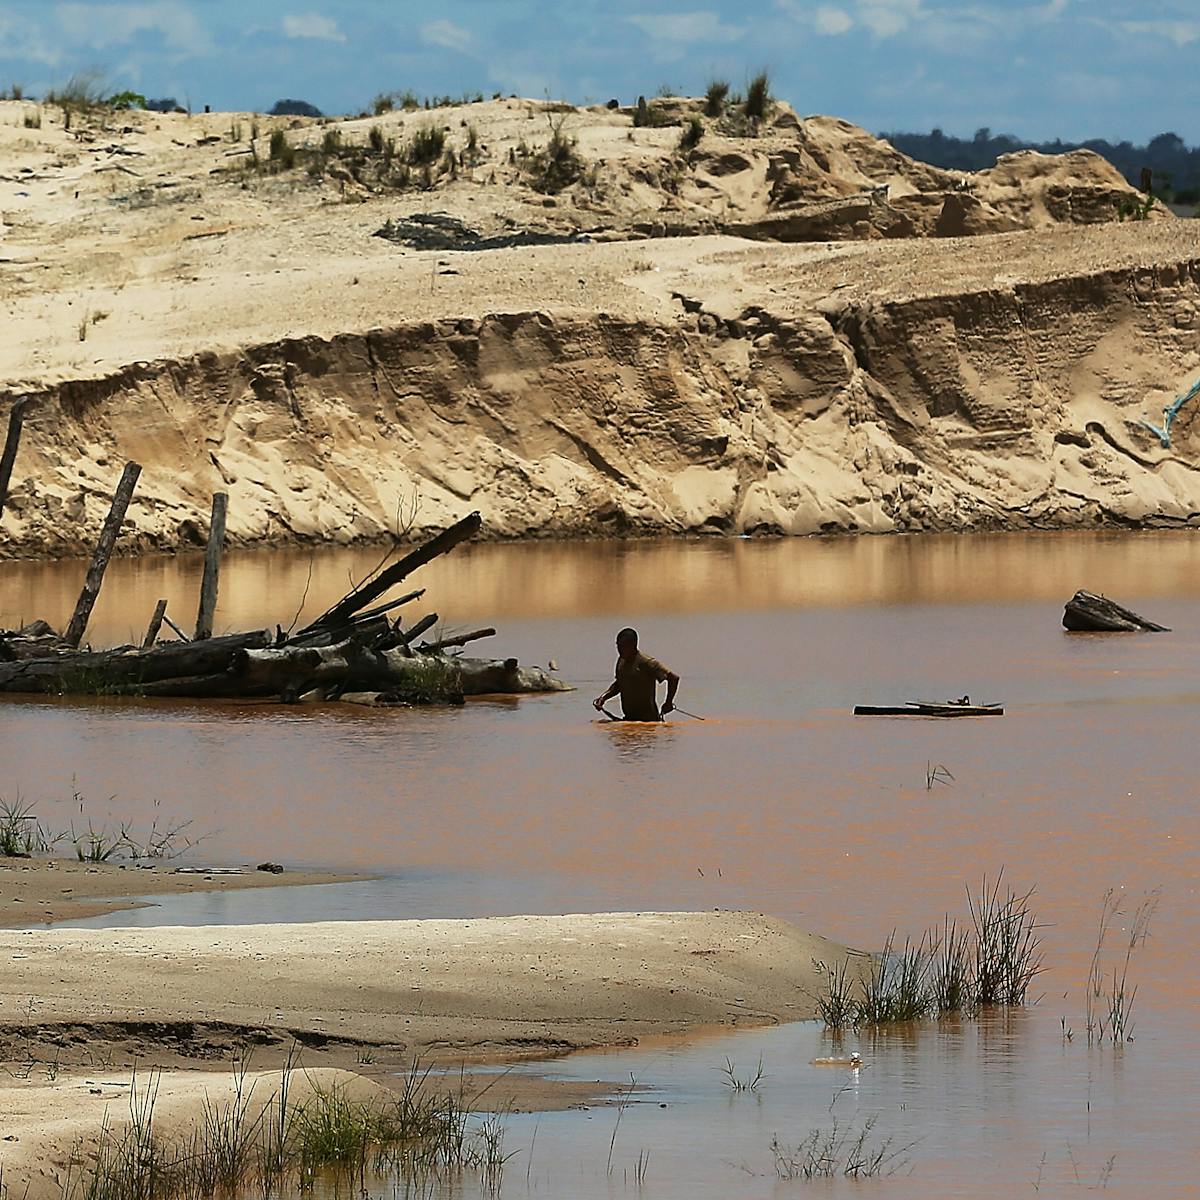 Gold rush, mercury legacy: Small-scale mining for gold has produced  long-lasting toxic pollution, from 1860s California to modern Peru